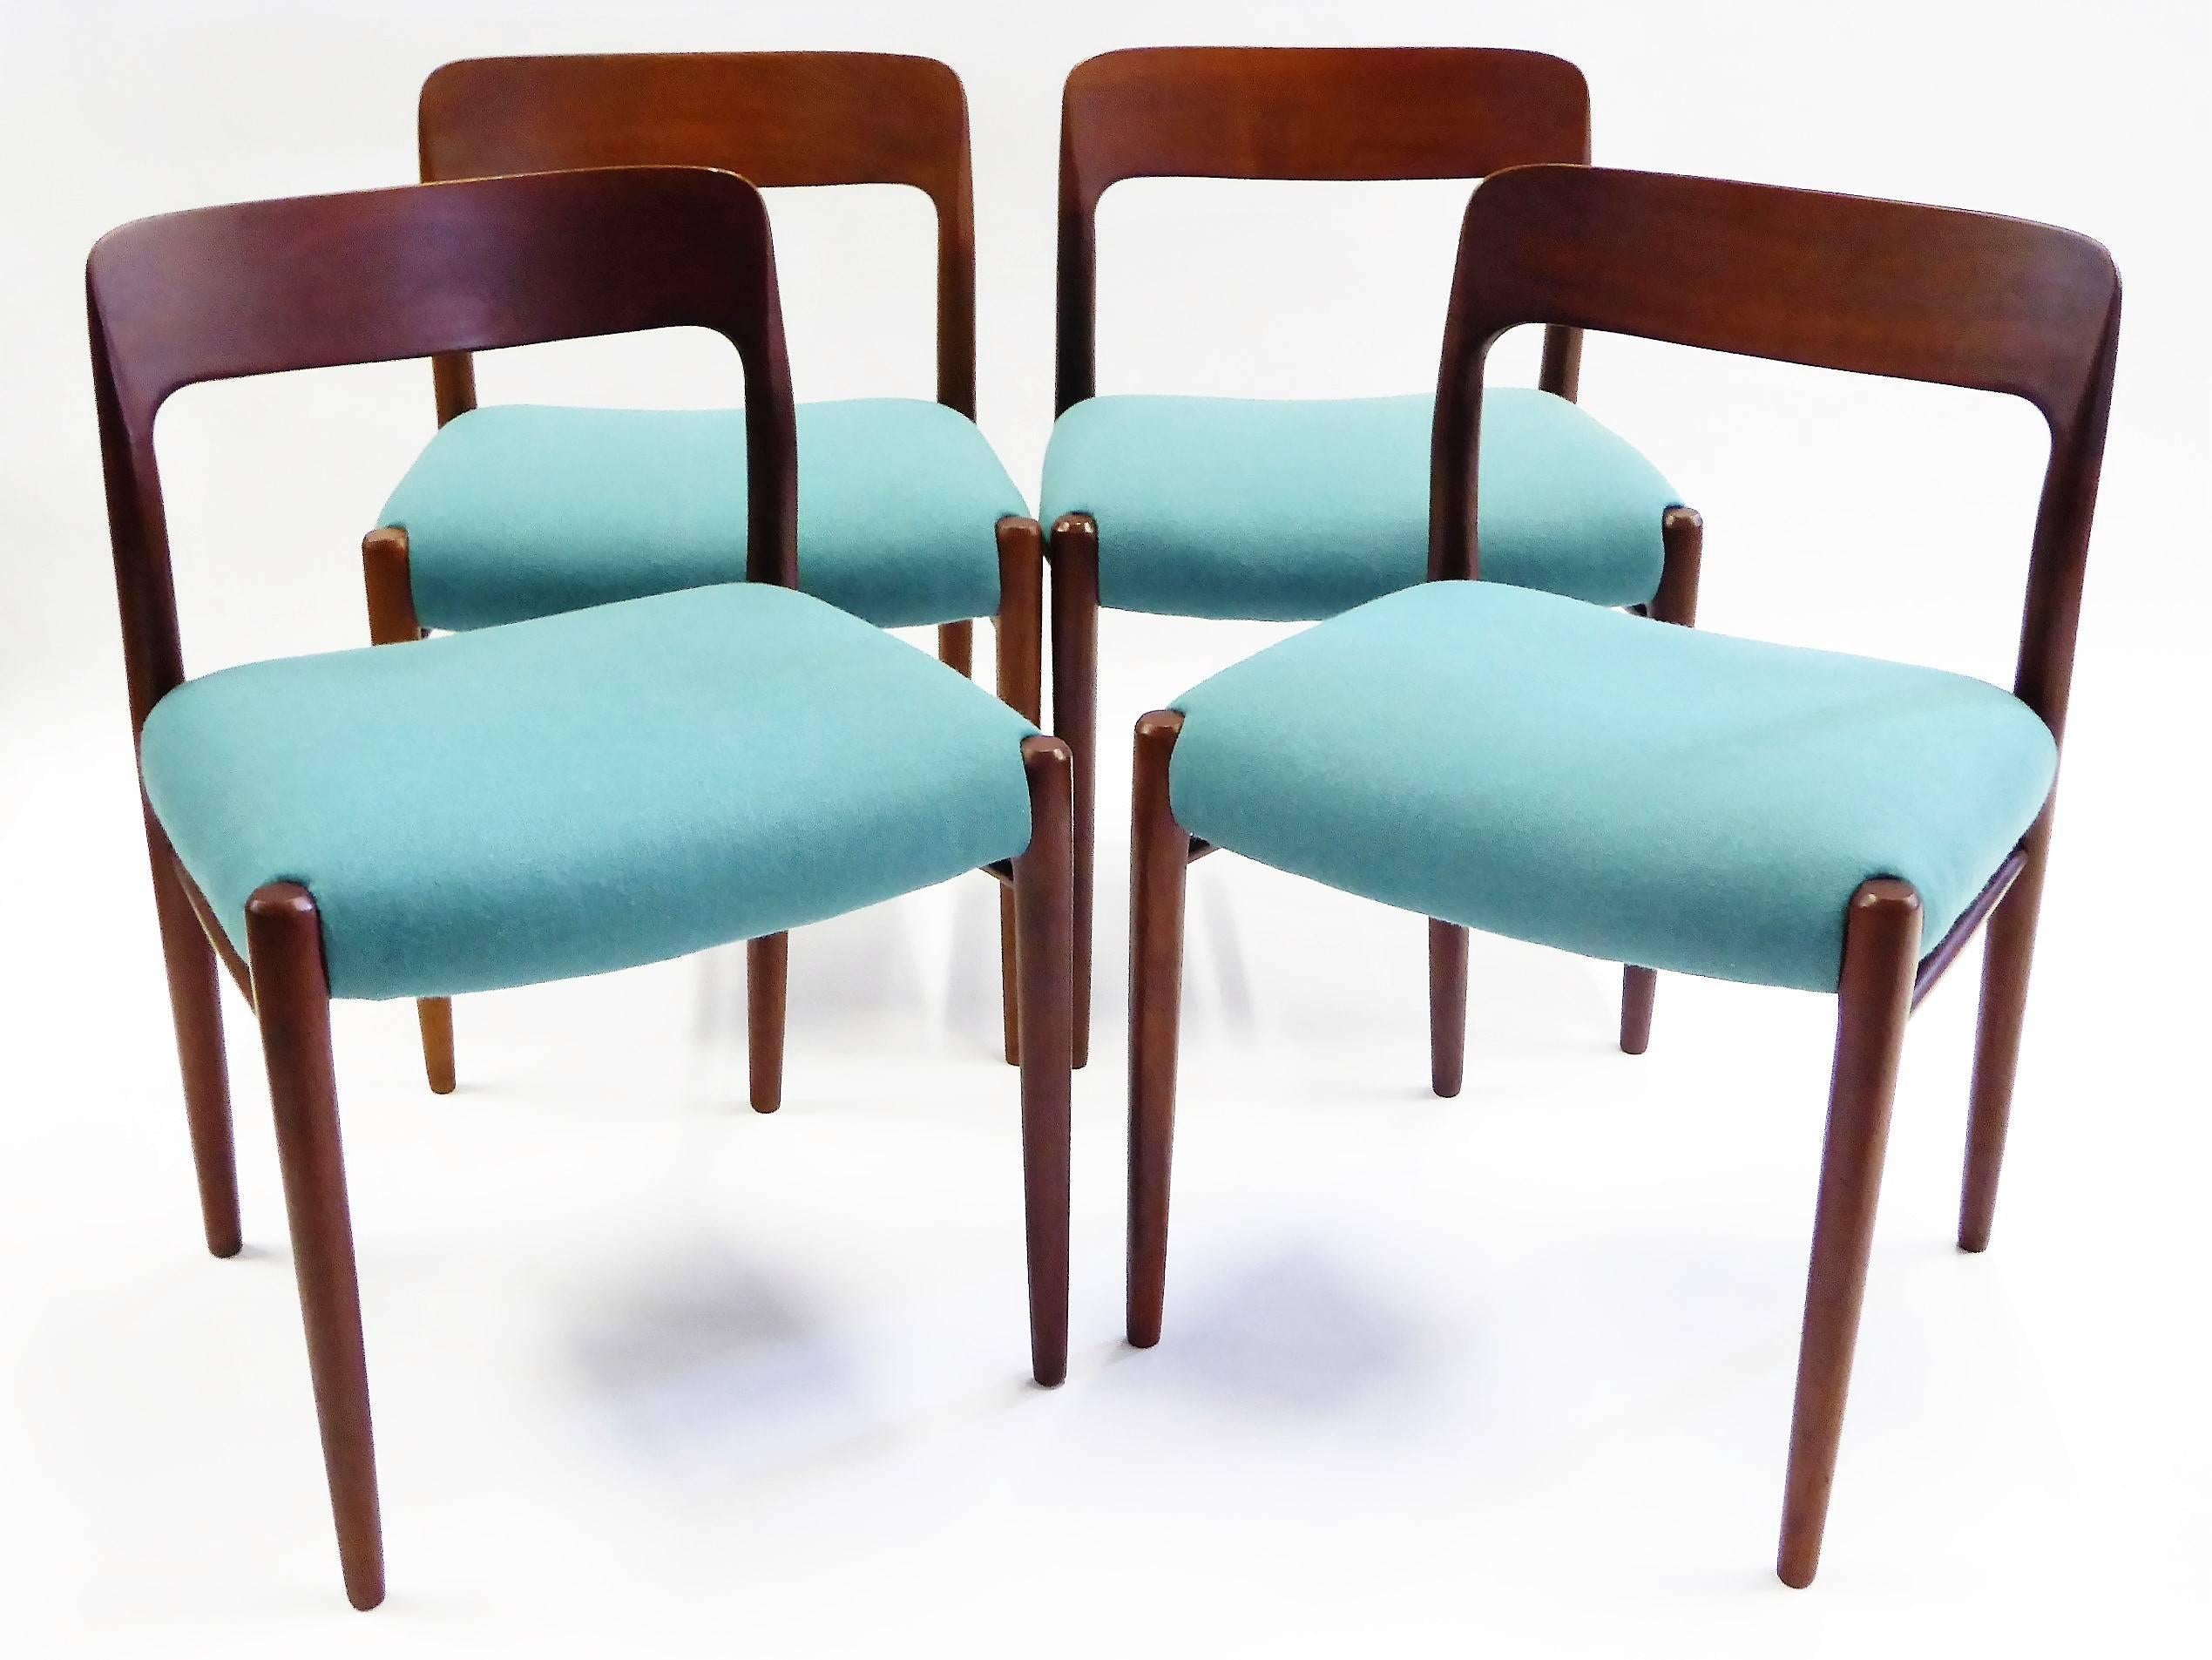 REDUCED FROM $2,650.
Warm dark figured teak highlights these four dining chairs designed by Niels Otto Møller in 1954 for his company JL Møller Møbelfabrik. Newly pushy upholstered seats in a seafoam wool weave. The artistry, quality and